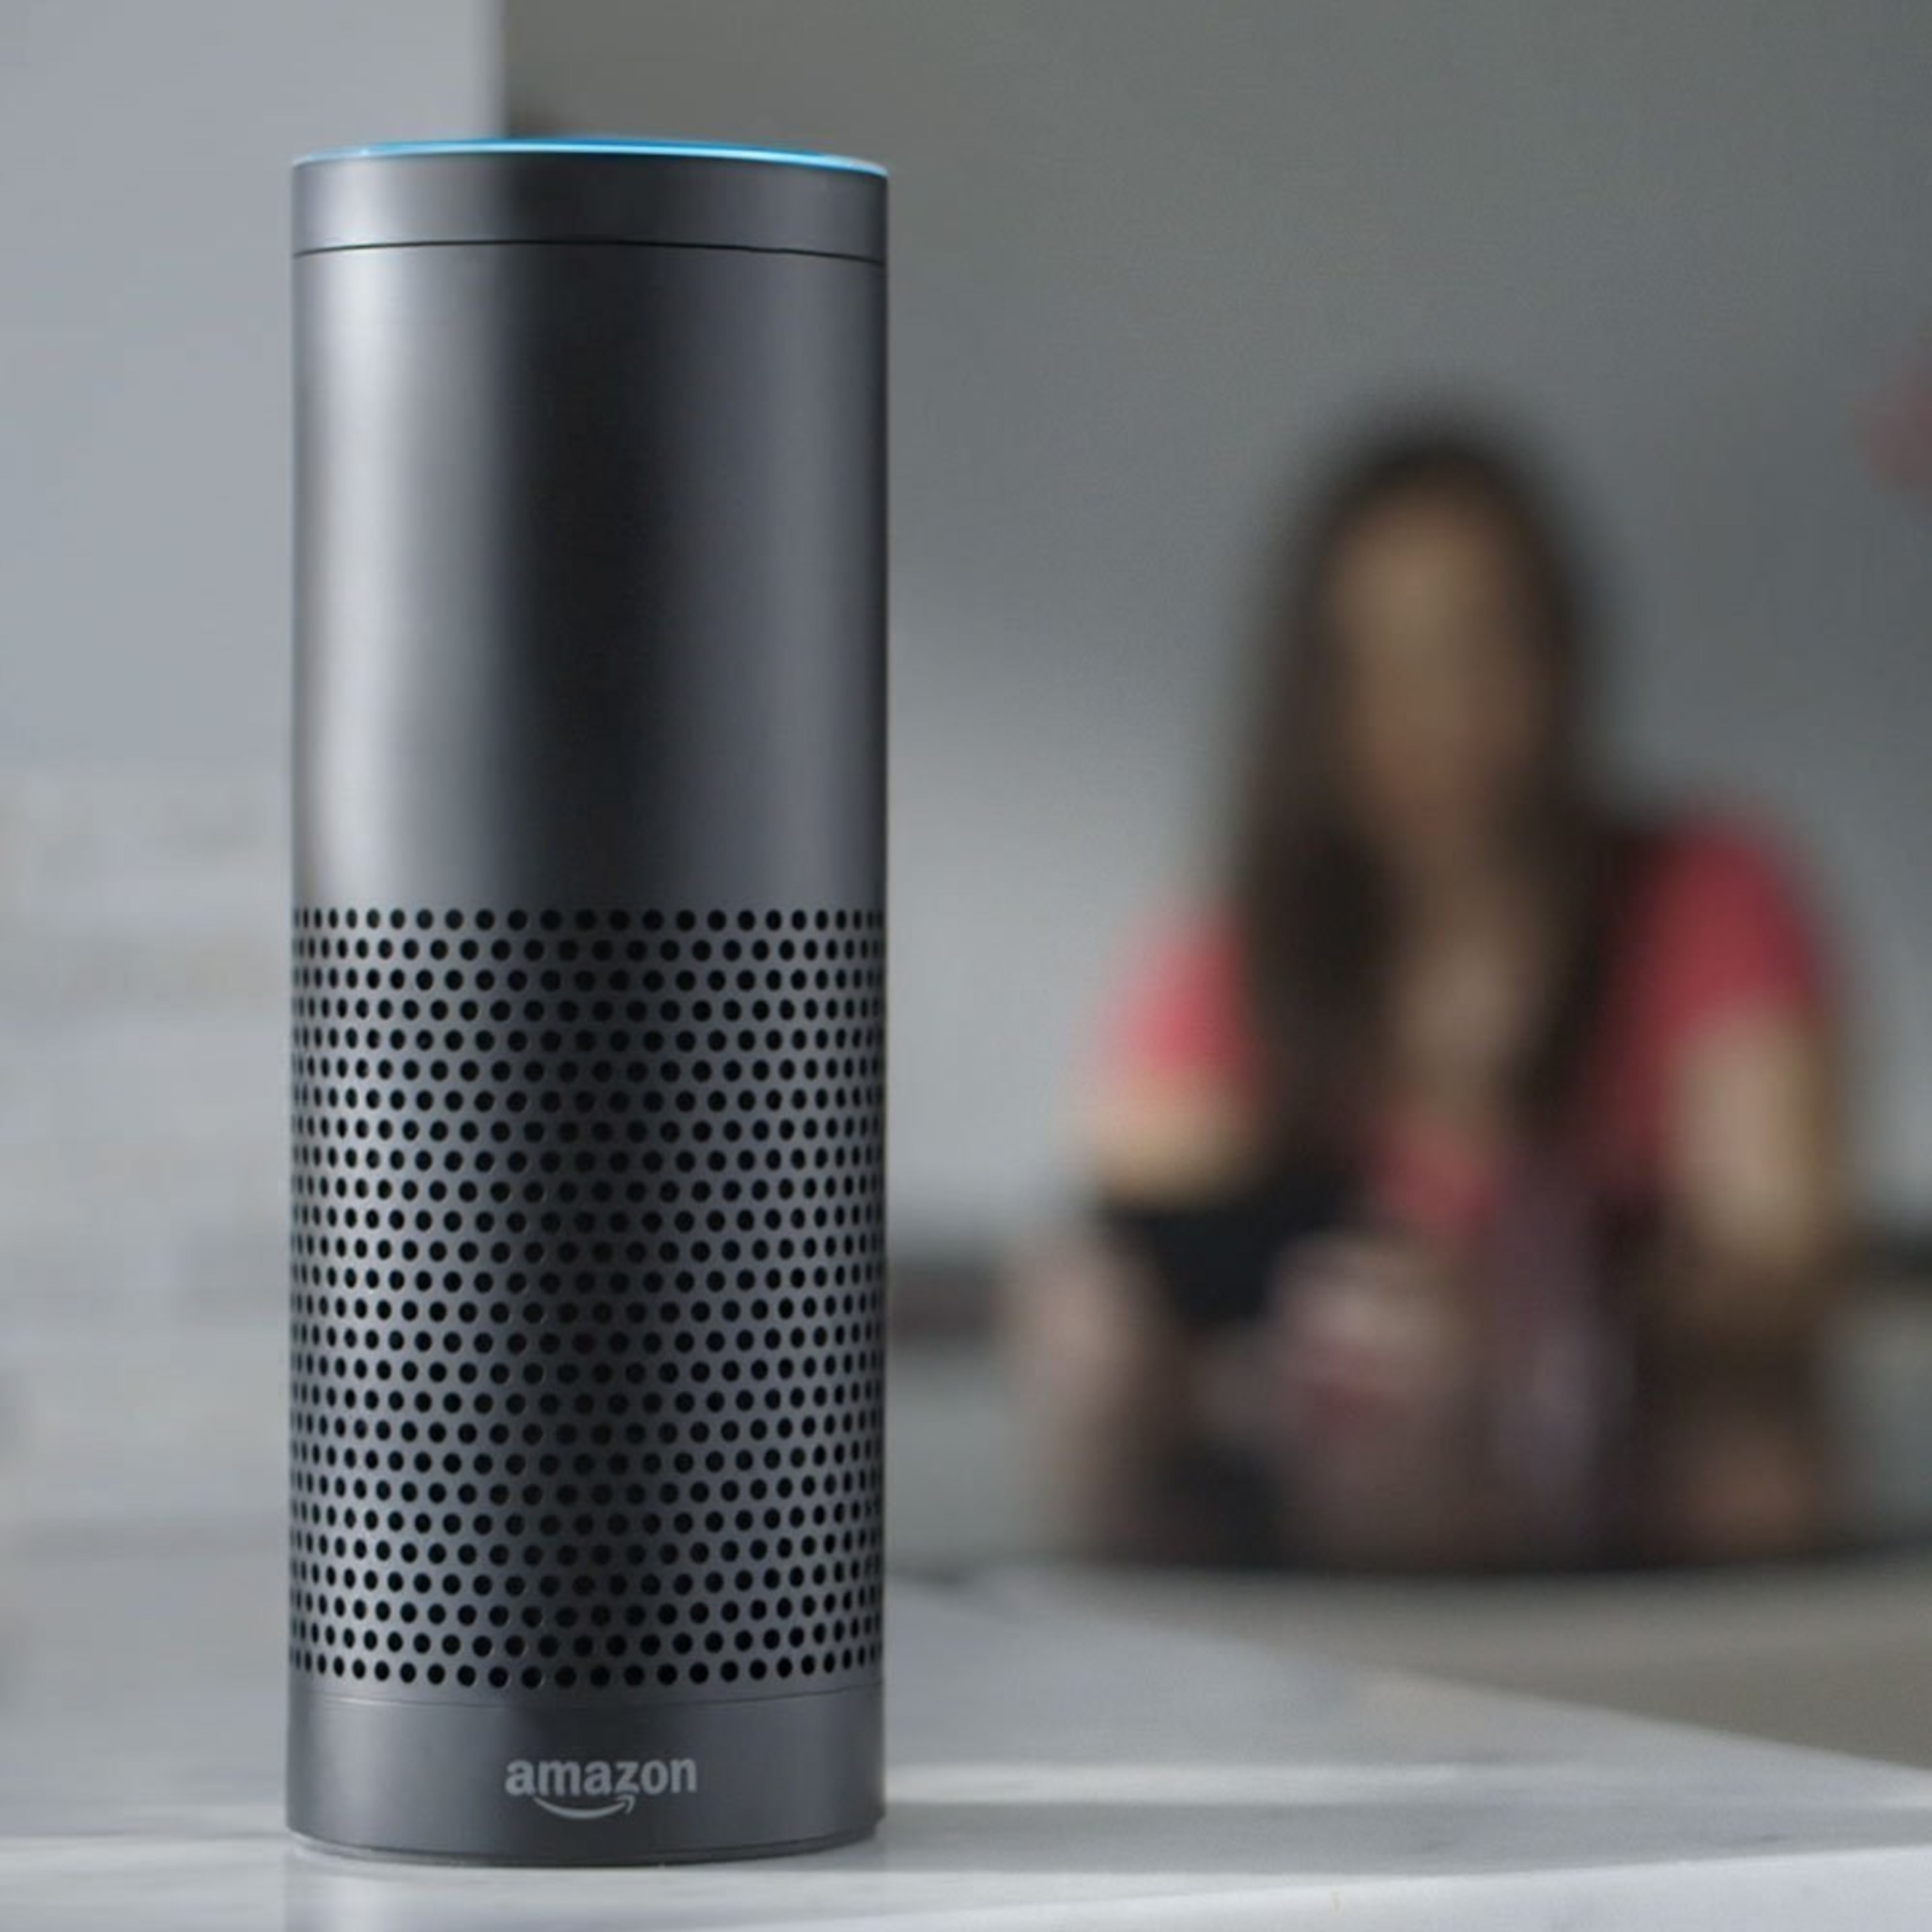 smid væk Blæse typisk Domino's® Adds Amazon Echo Ordering Capability in Time for Big Game